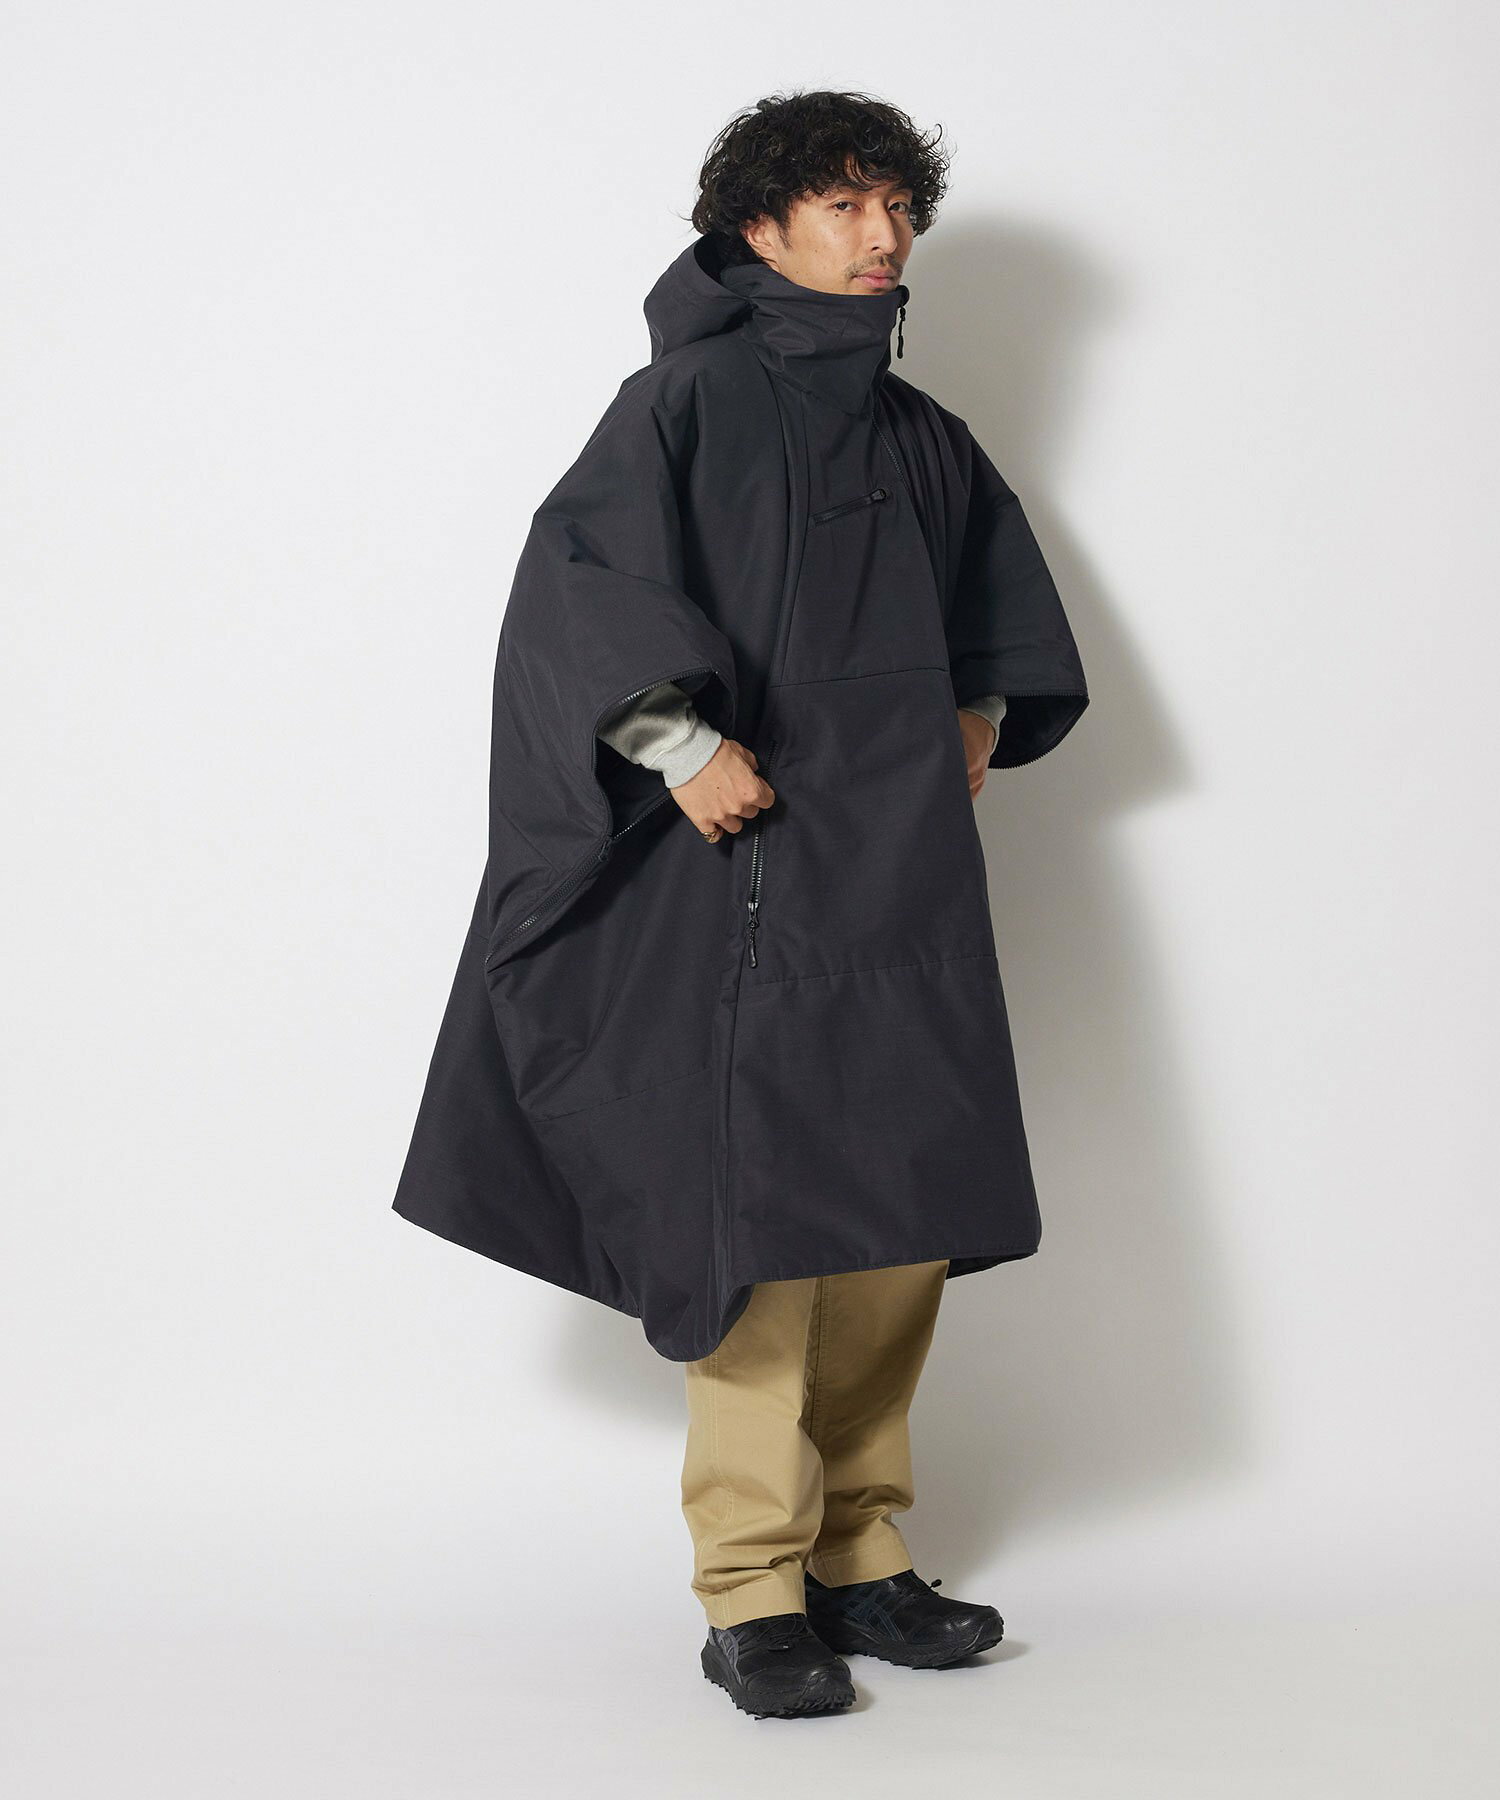 FR 2L Insulated Poncho